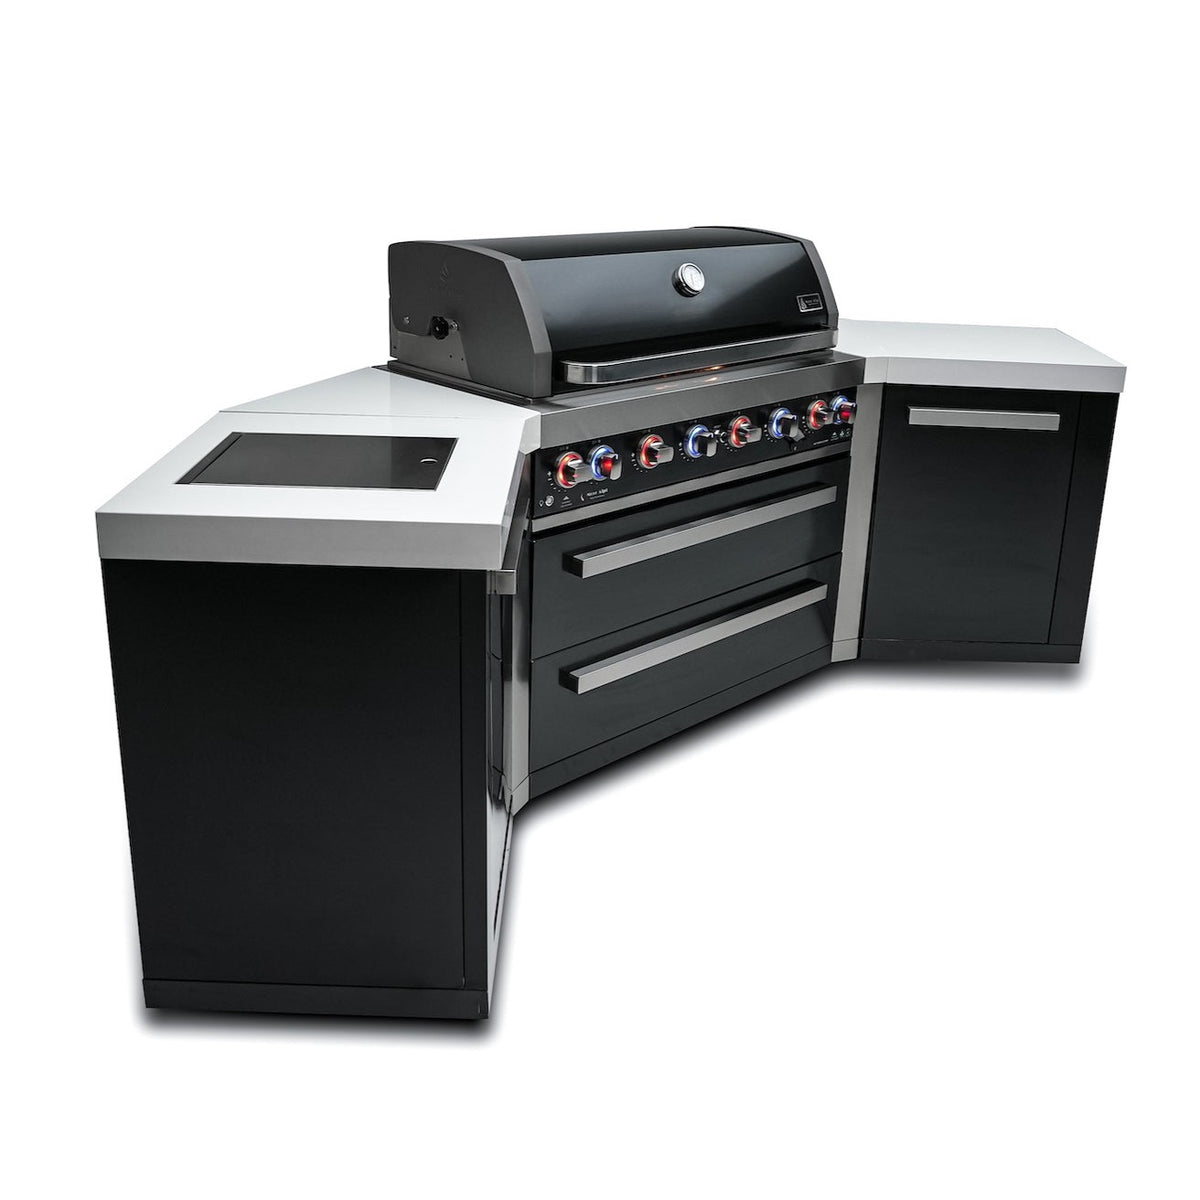 Mont Alpi Islands Mont Alpi 805 Black Stainless Steel Island with Two 45 Degree Corners / 6-Burner Grill, 2 Infrared Burners, Rotisserie Kit, Cover / MAi805-BSS45